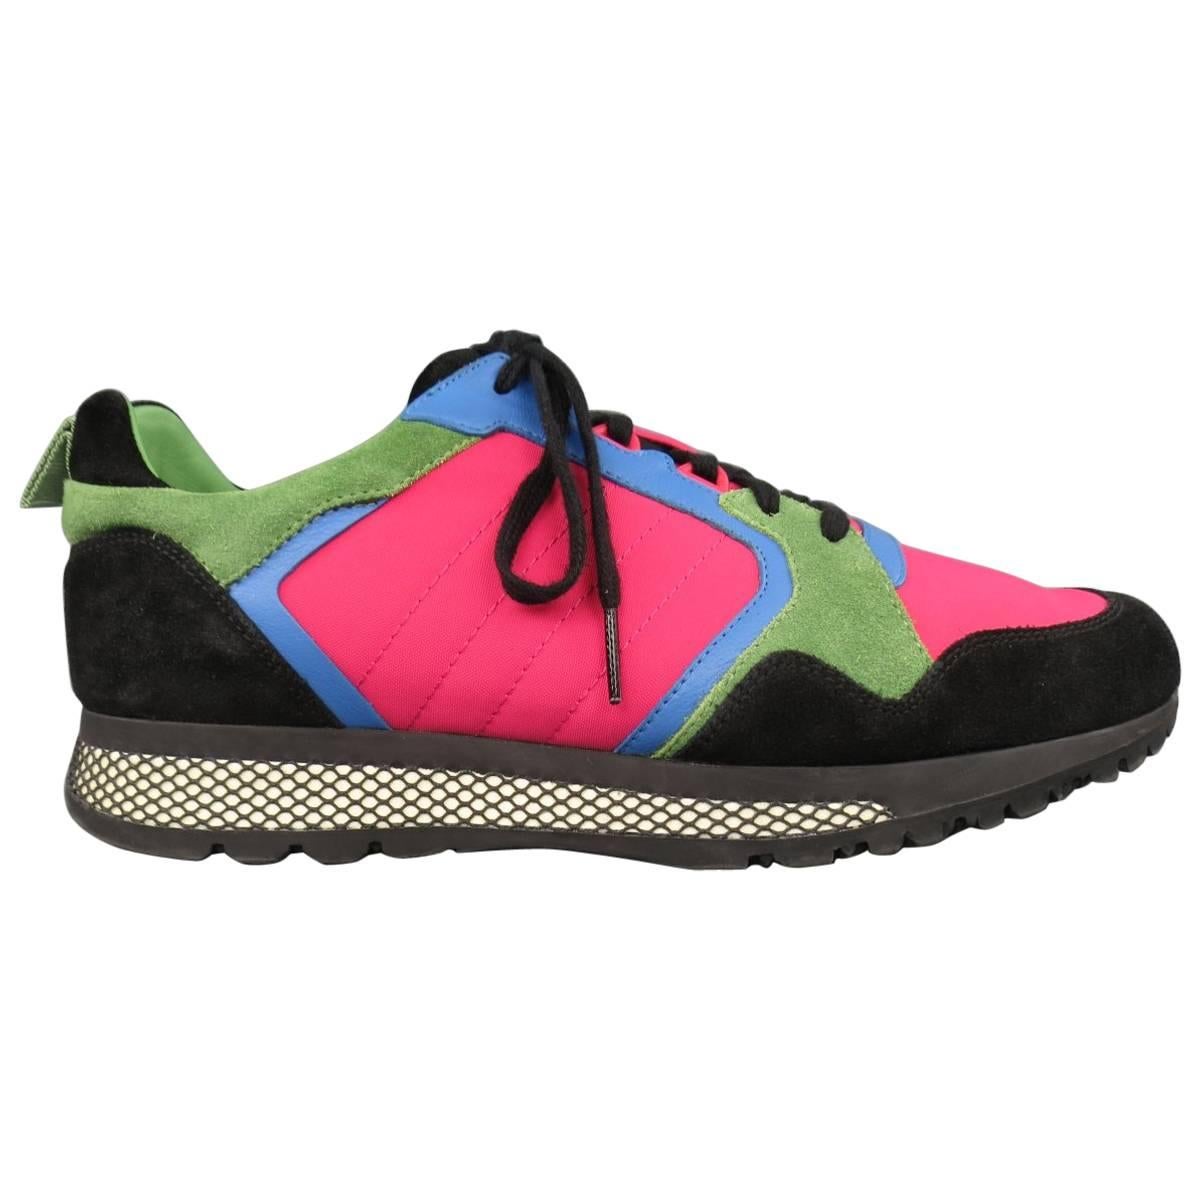 Men's GUCCI Size 10 Neon Pink Green Blue & Black Nylon & Suede Trainer Sneakers